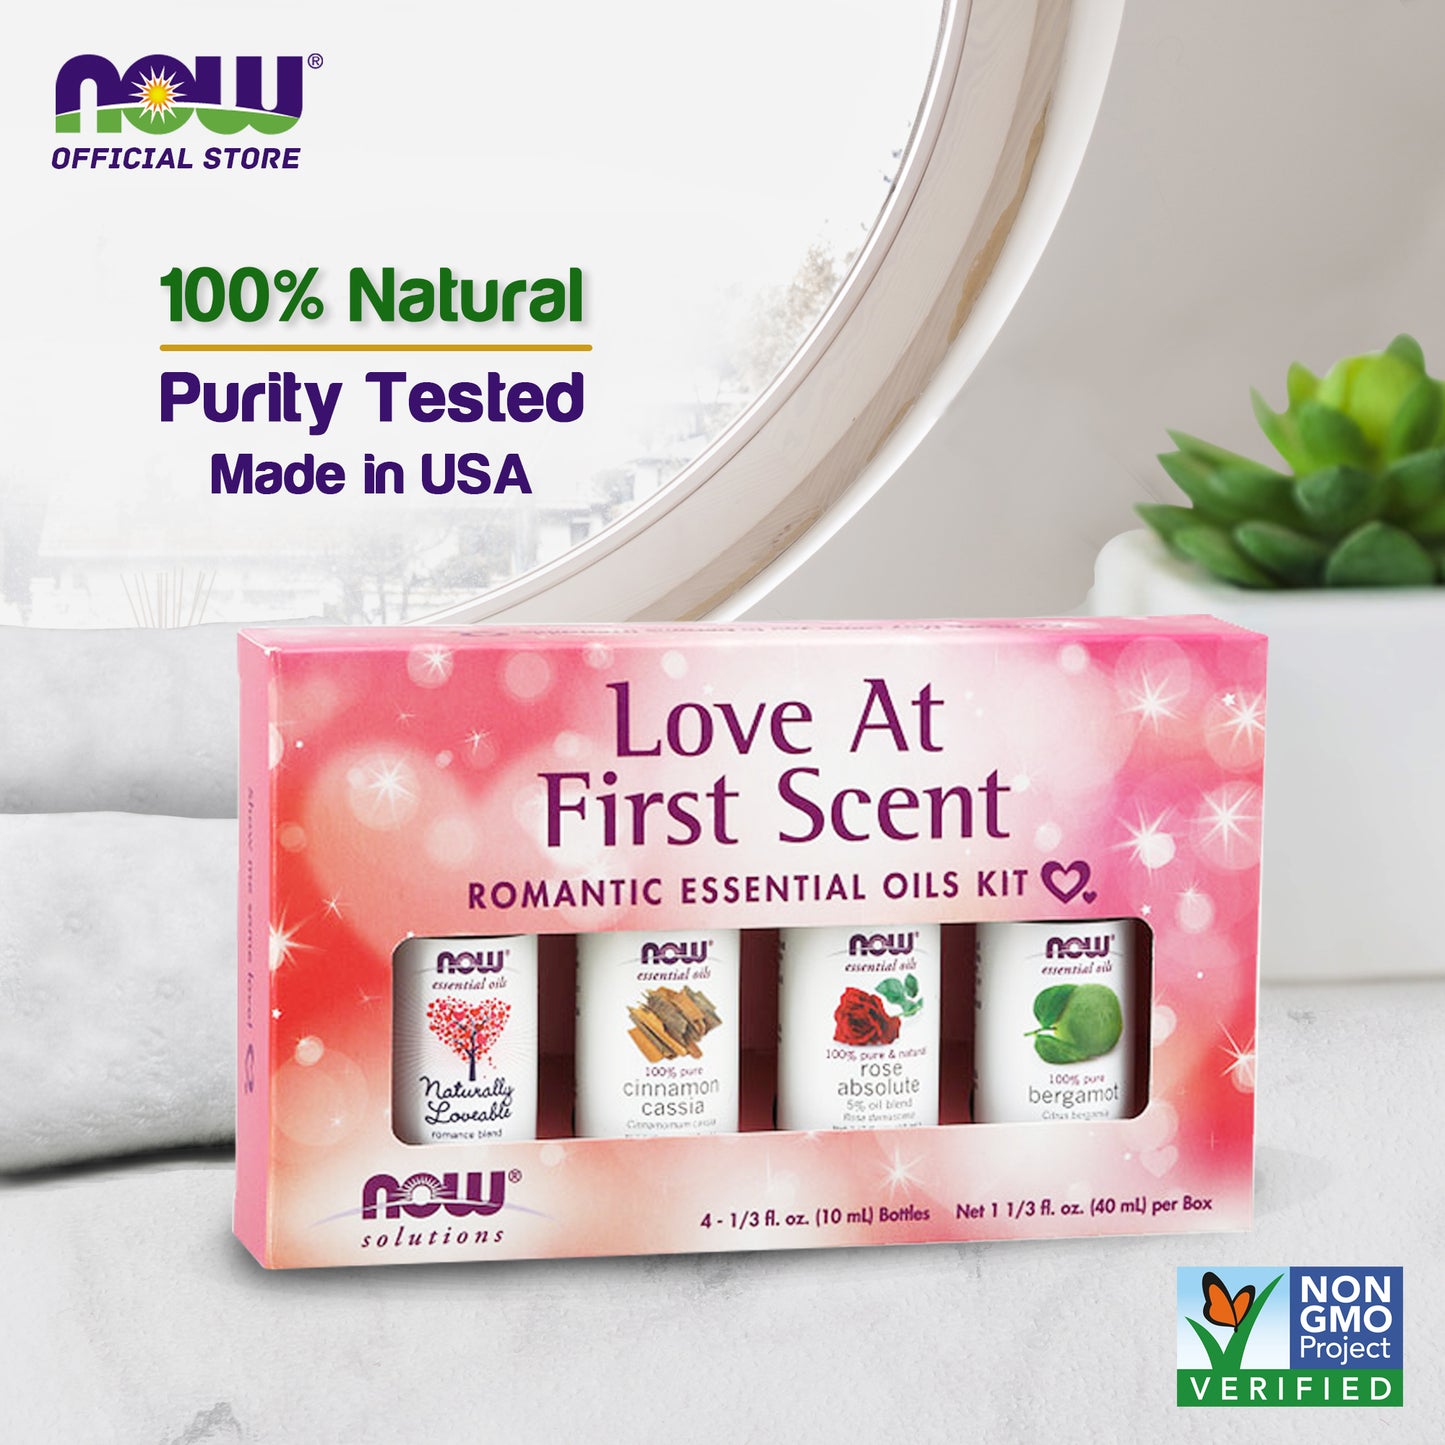 NOW Essential Oils, Love at First Scent Aromatherapy Kit, 4x10ml Including: Bergamot, Cinnamon Cassia, Rose Absolute and our Naturally Loveable Essential Oil Blend With Child Resistant Caps